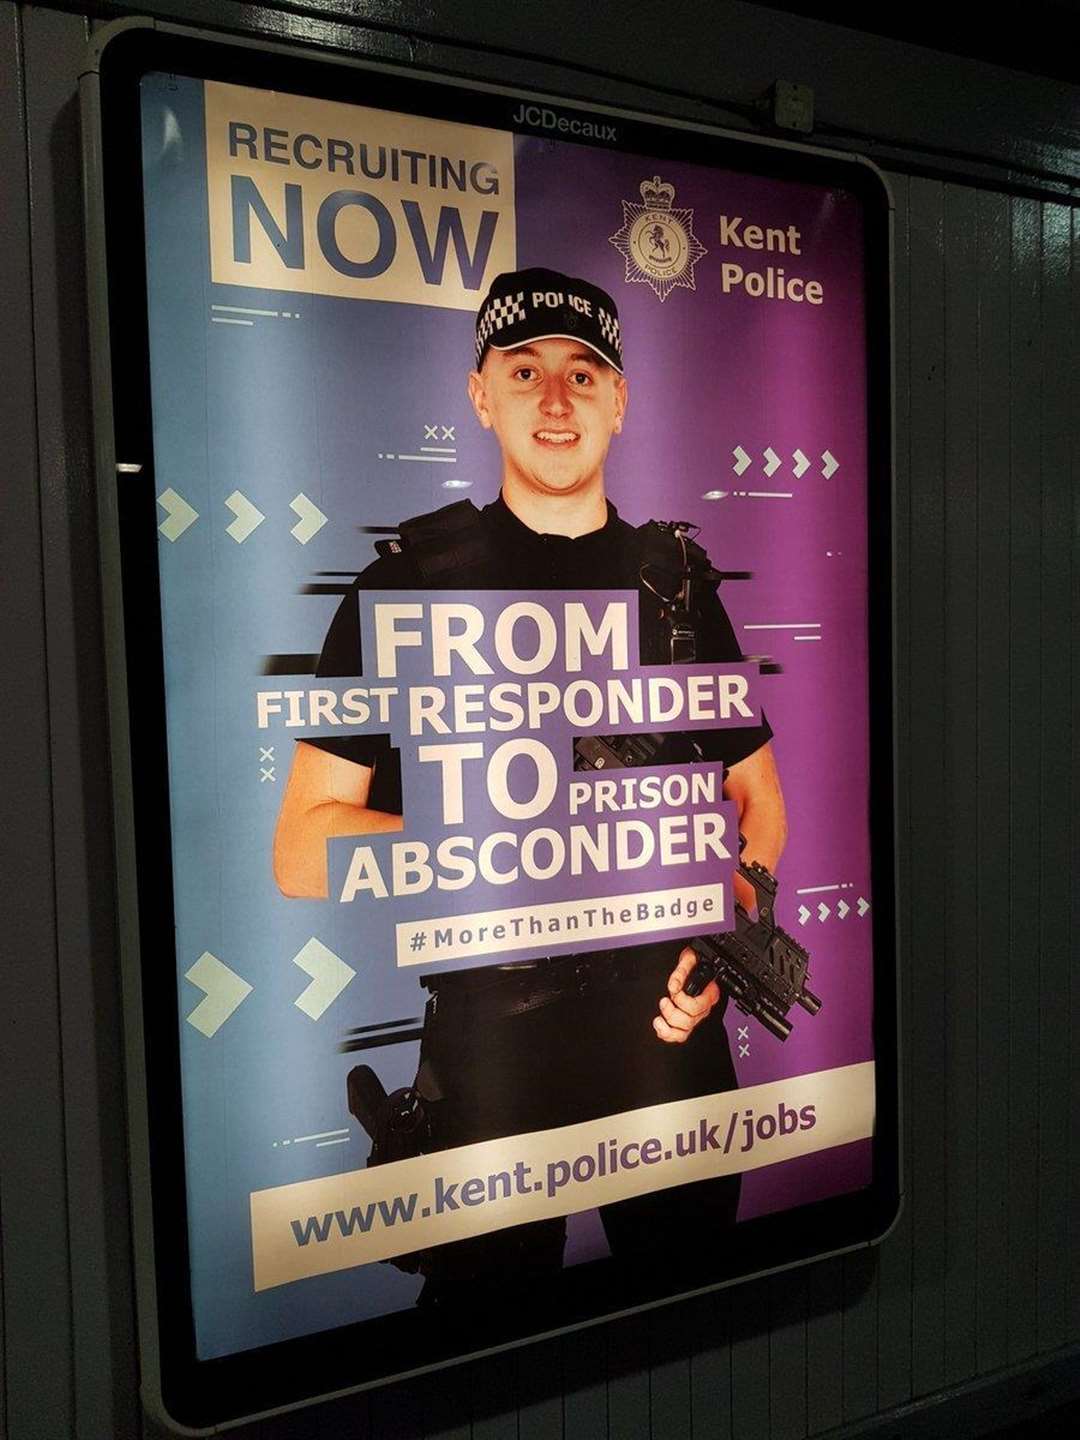 The police recruitment advert (3858621)